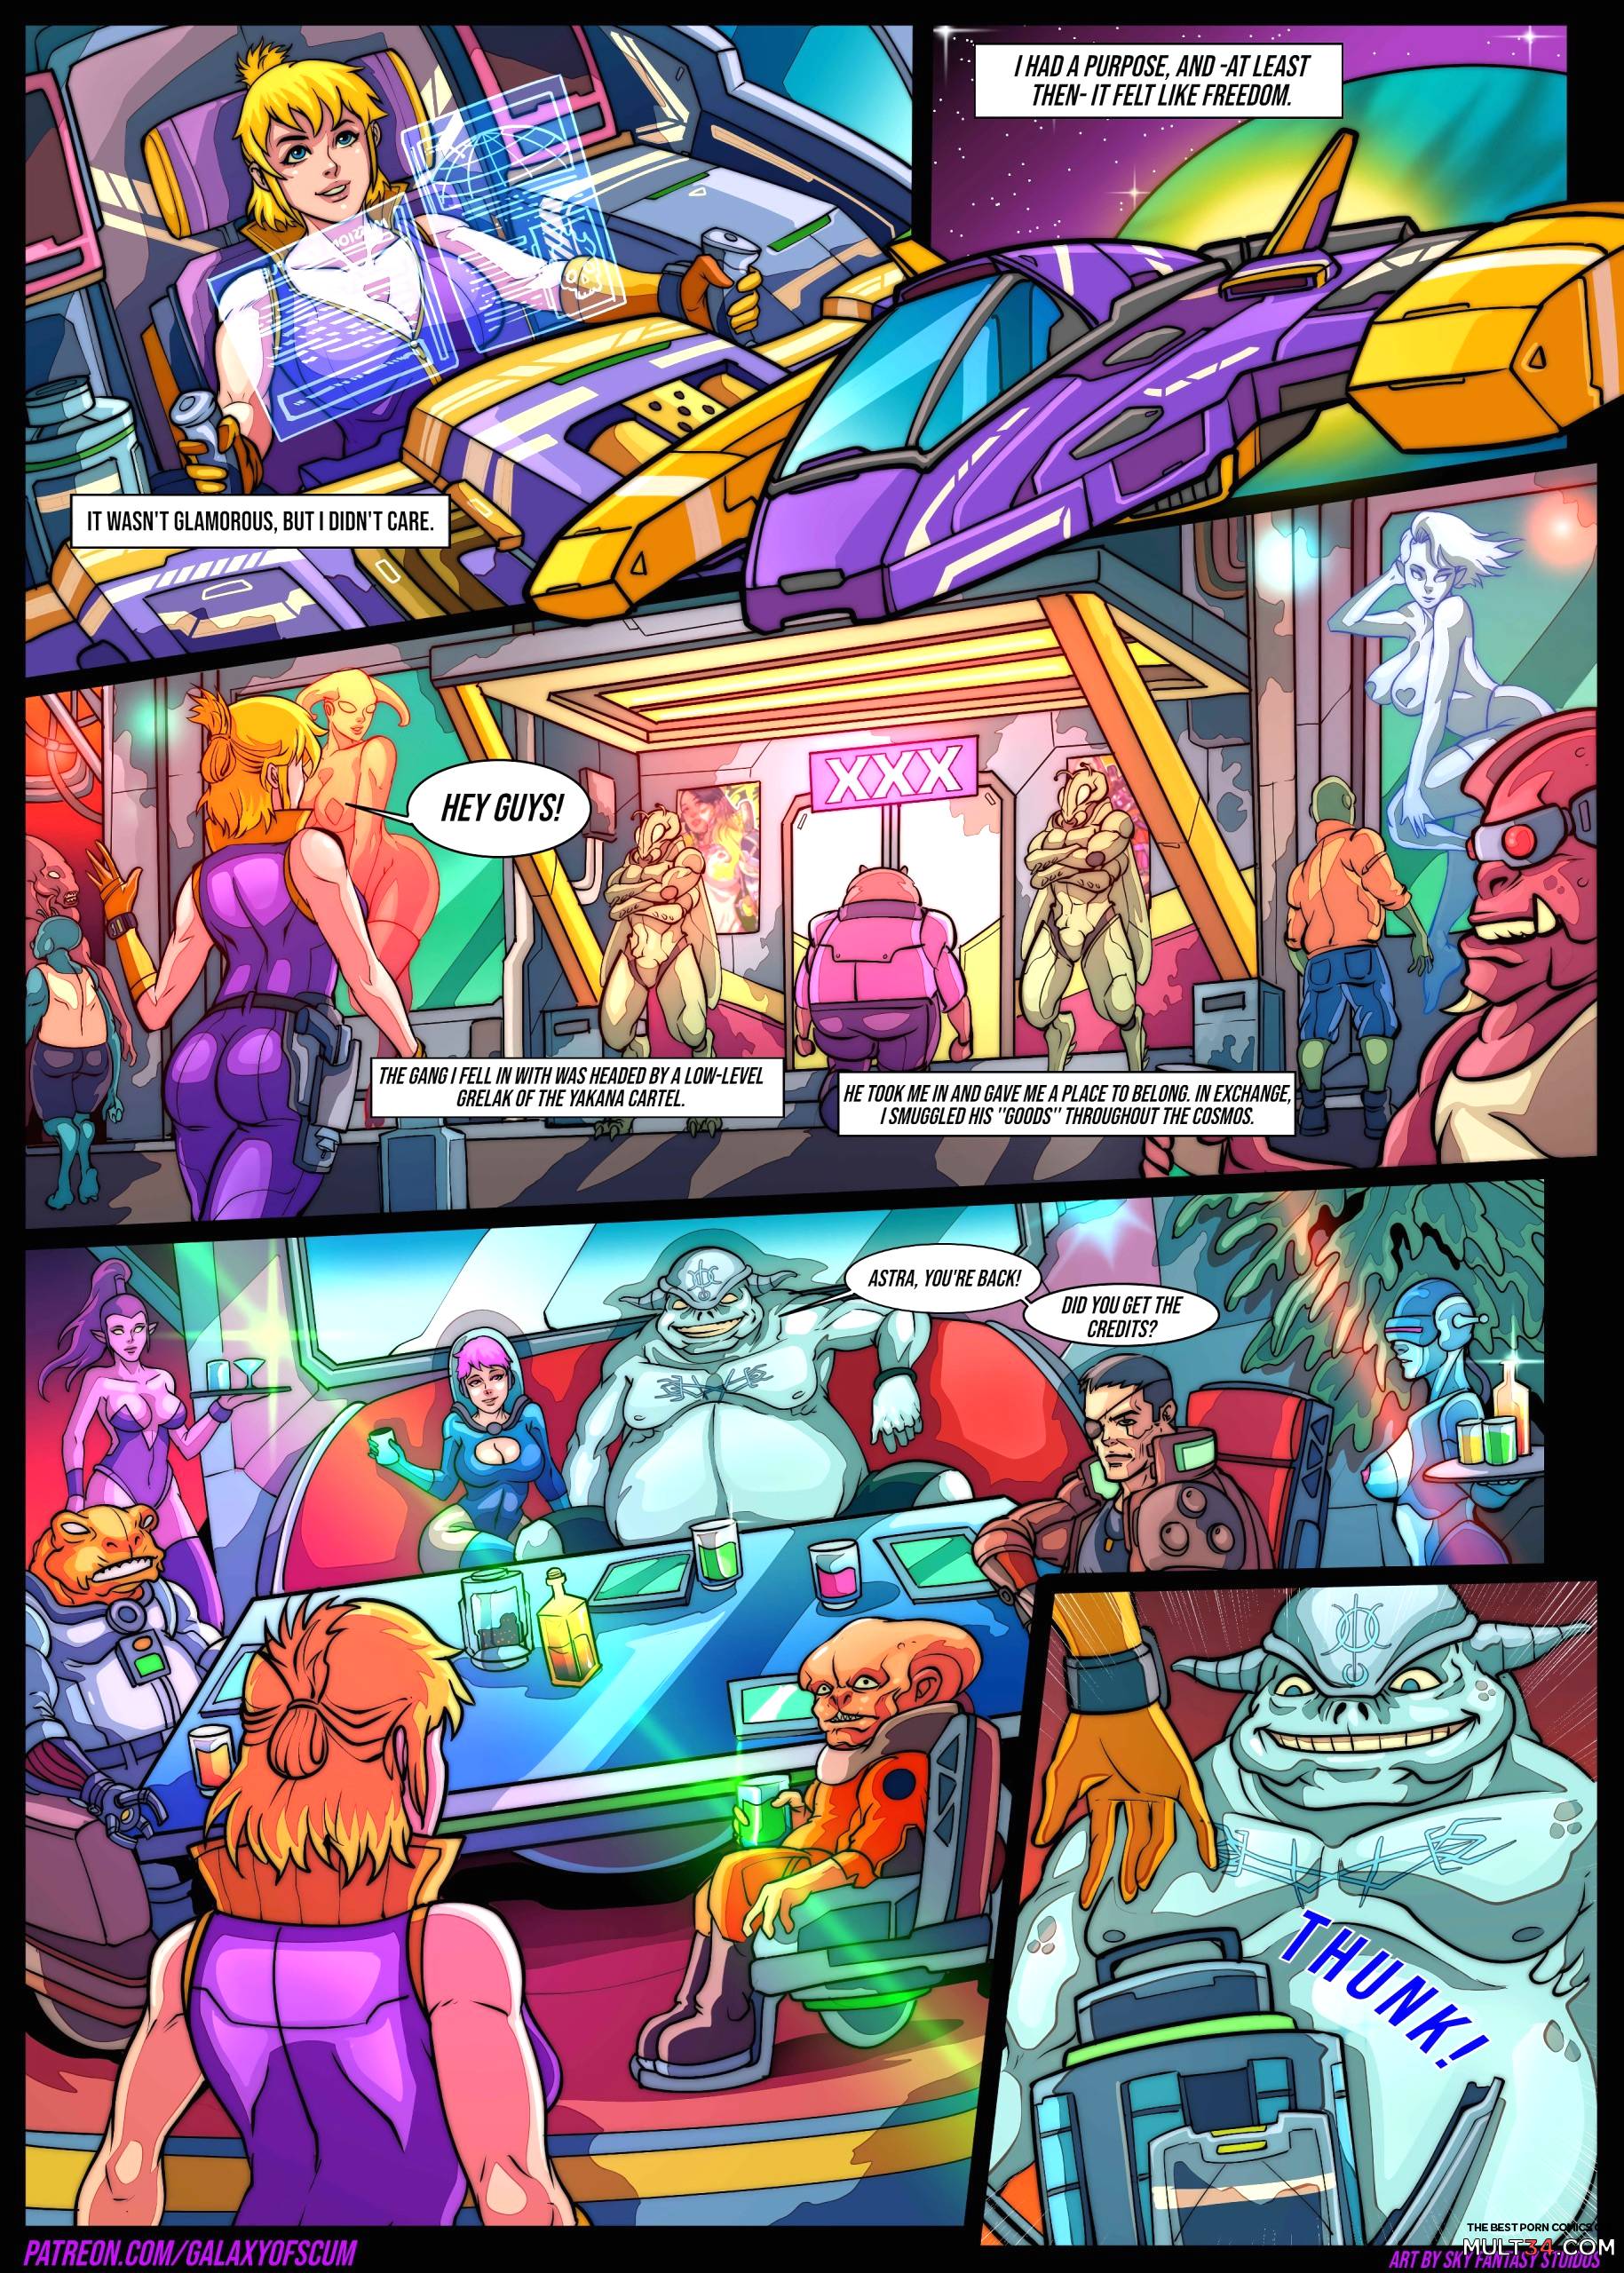 Galaxy of Scum Issue 2: Smuggler's and Bugs page 5